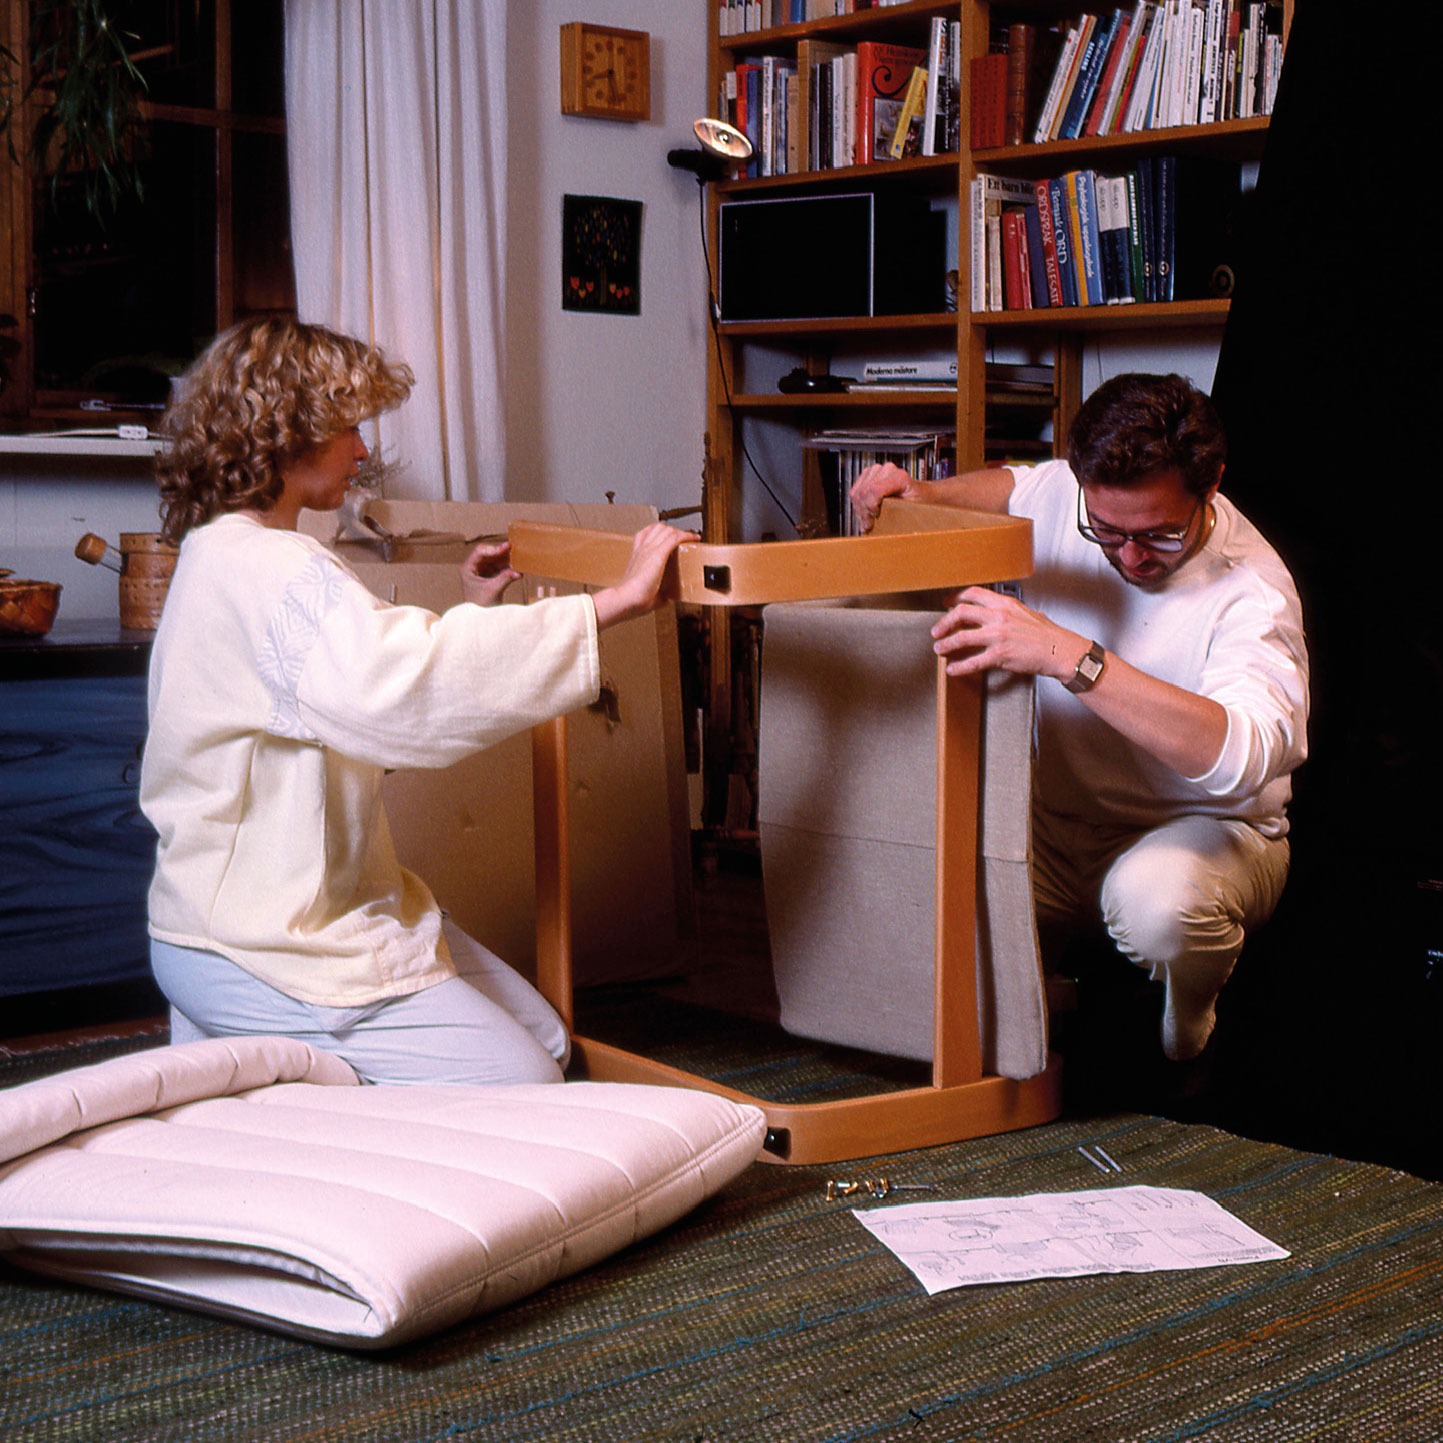 A blonde woman and dark-haired man sit on a green carpet, assembling a chair while man reads instructions.